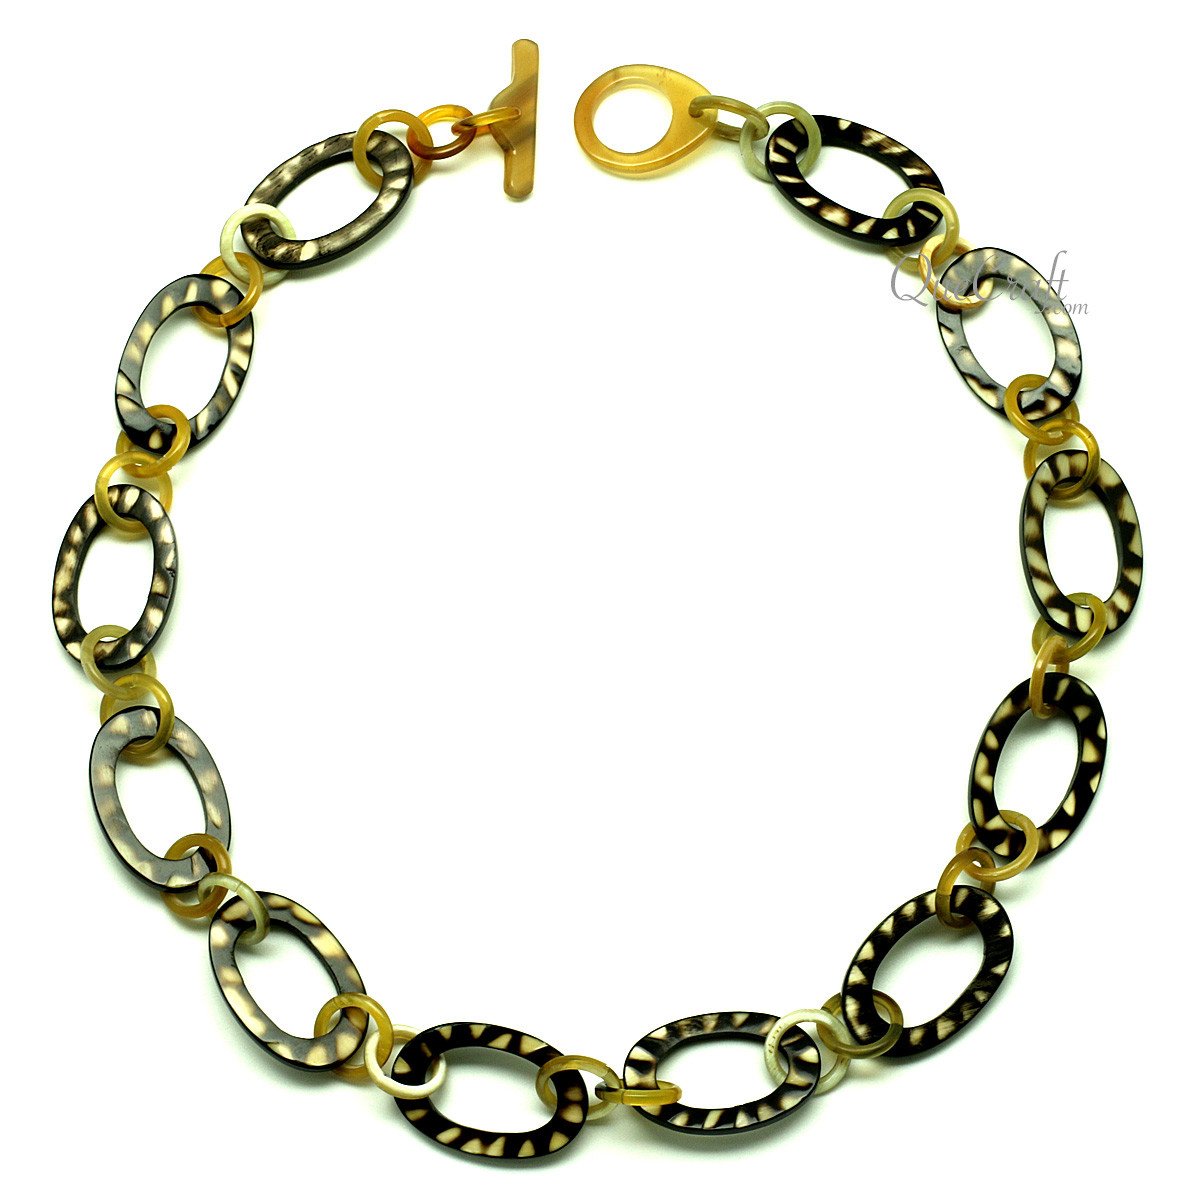 Horn Chain Necklace #12917 - HORN JEWELRY